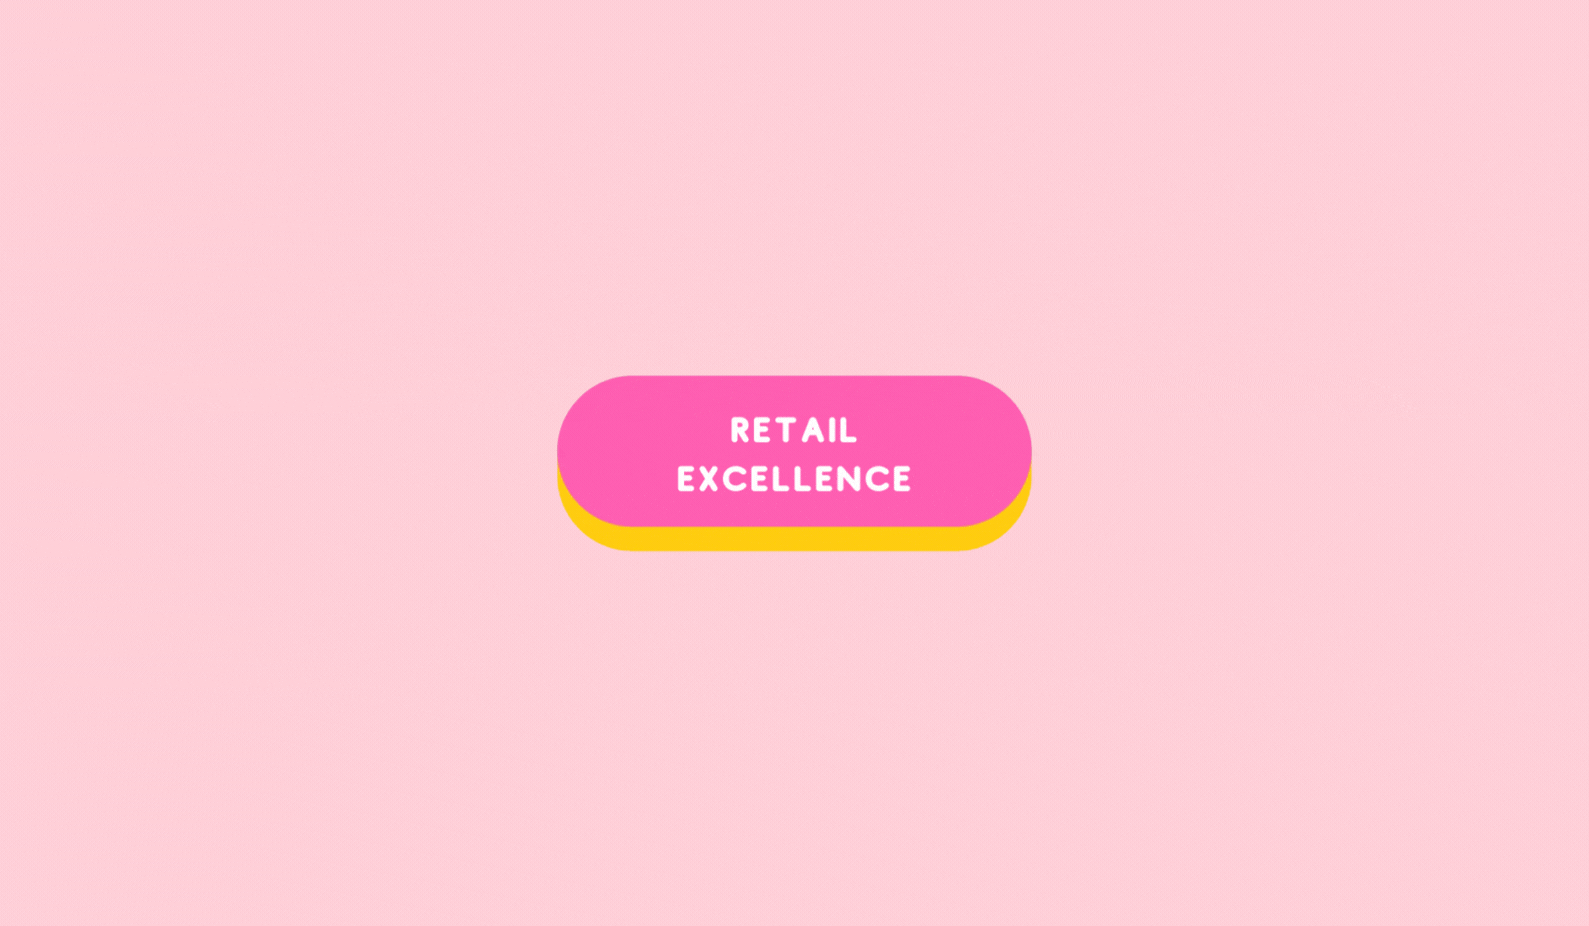 PRESS THE RETAIL EXCELLENCE BUTTON